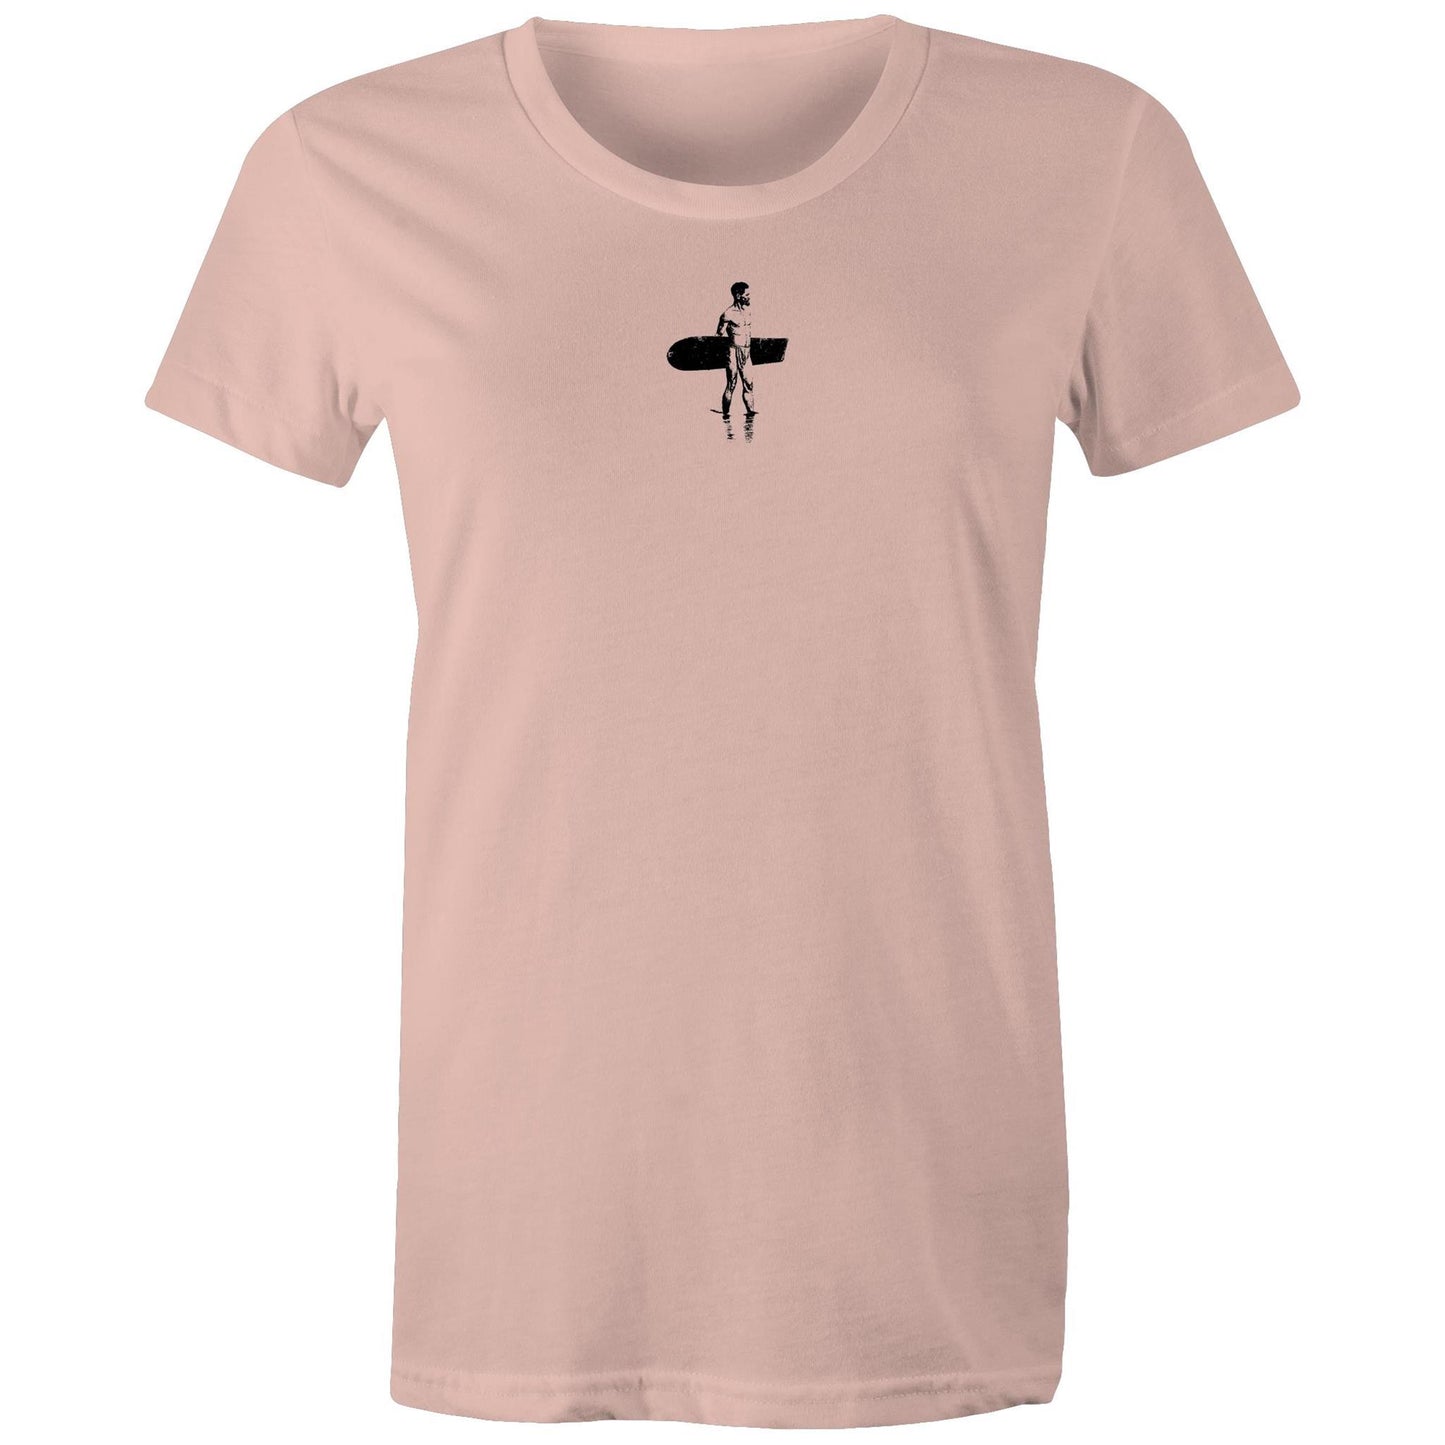 Finless is More T Shirts for Women